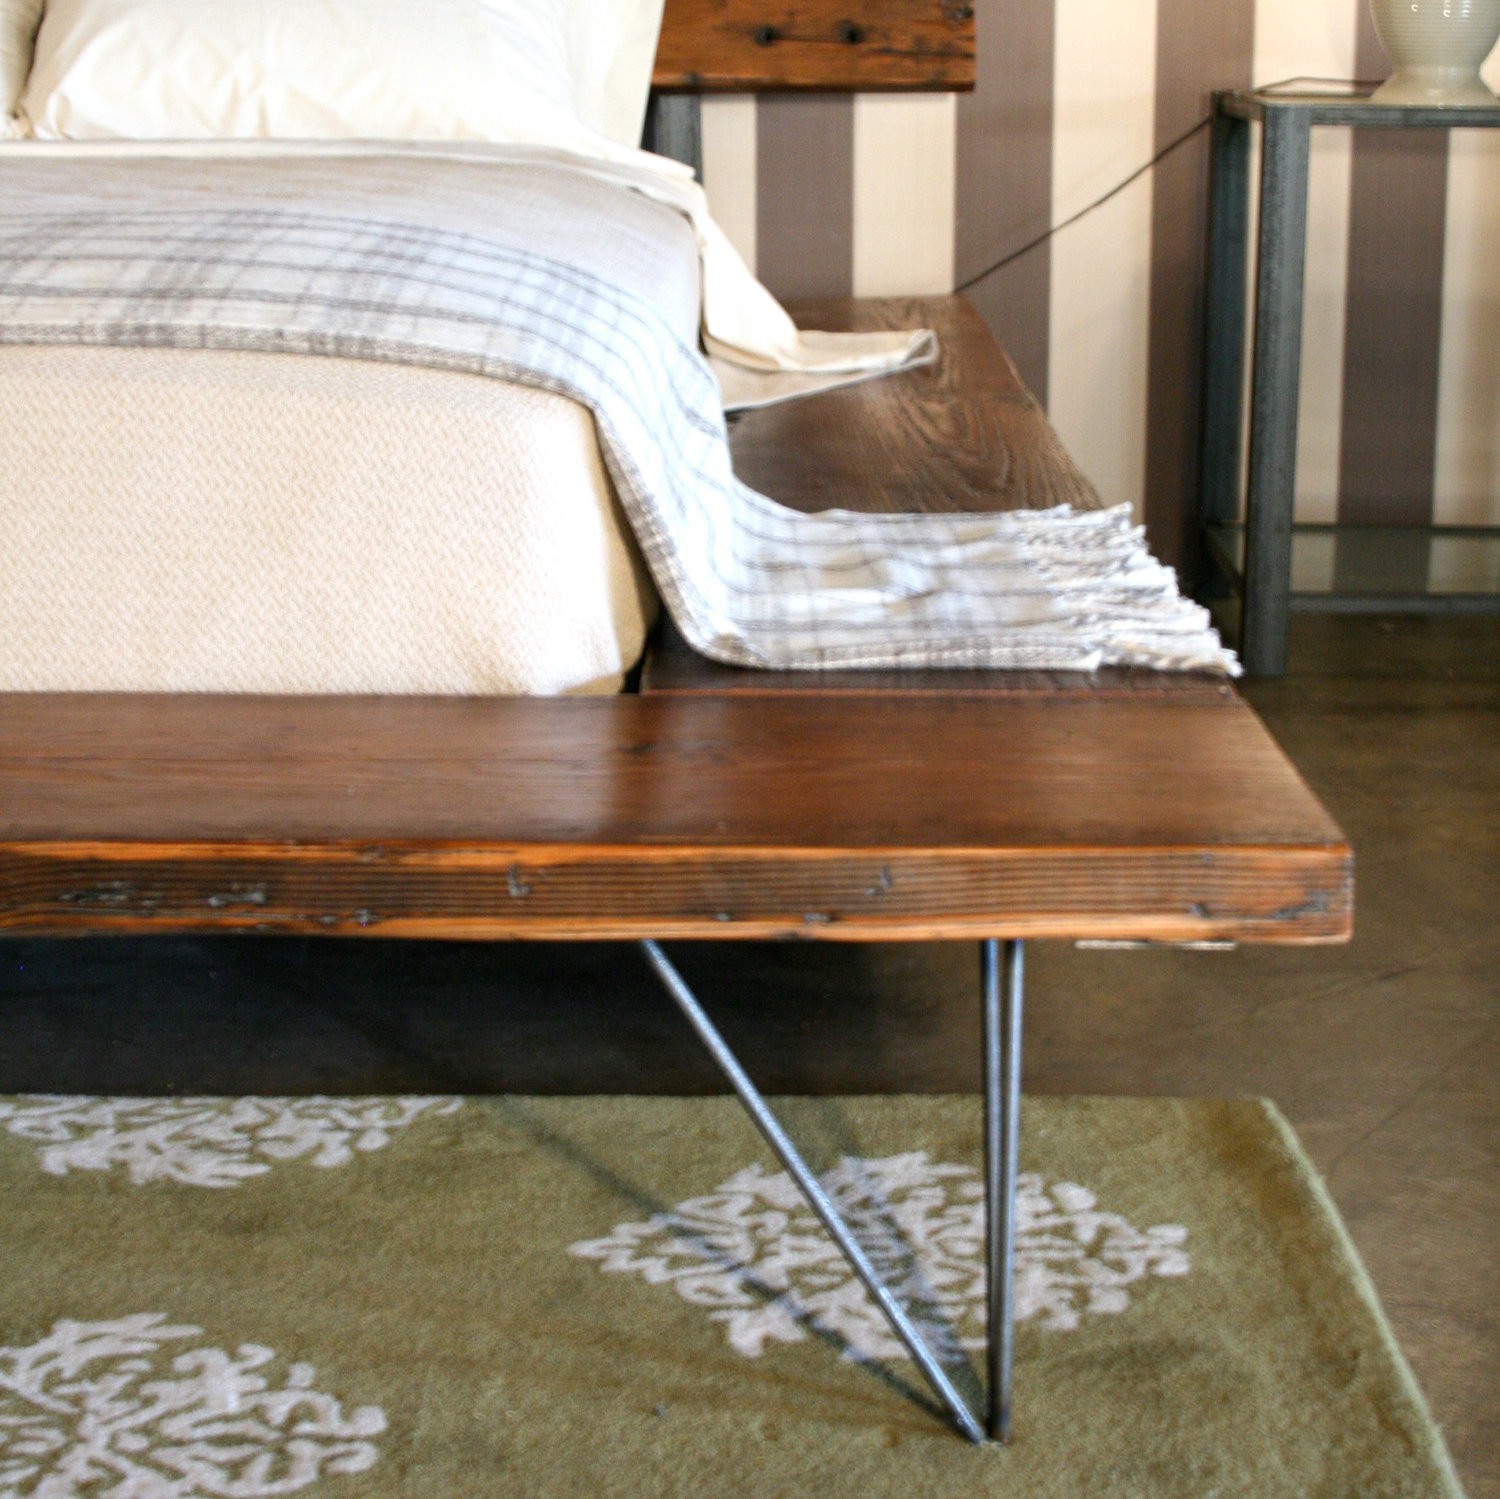 Brown Stained Wooden Bed Frame With Silver Polished Iron Legs Placed ...